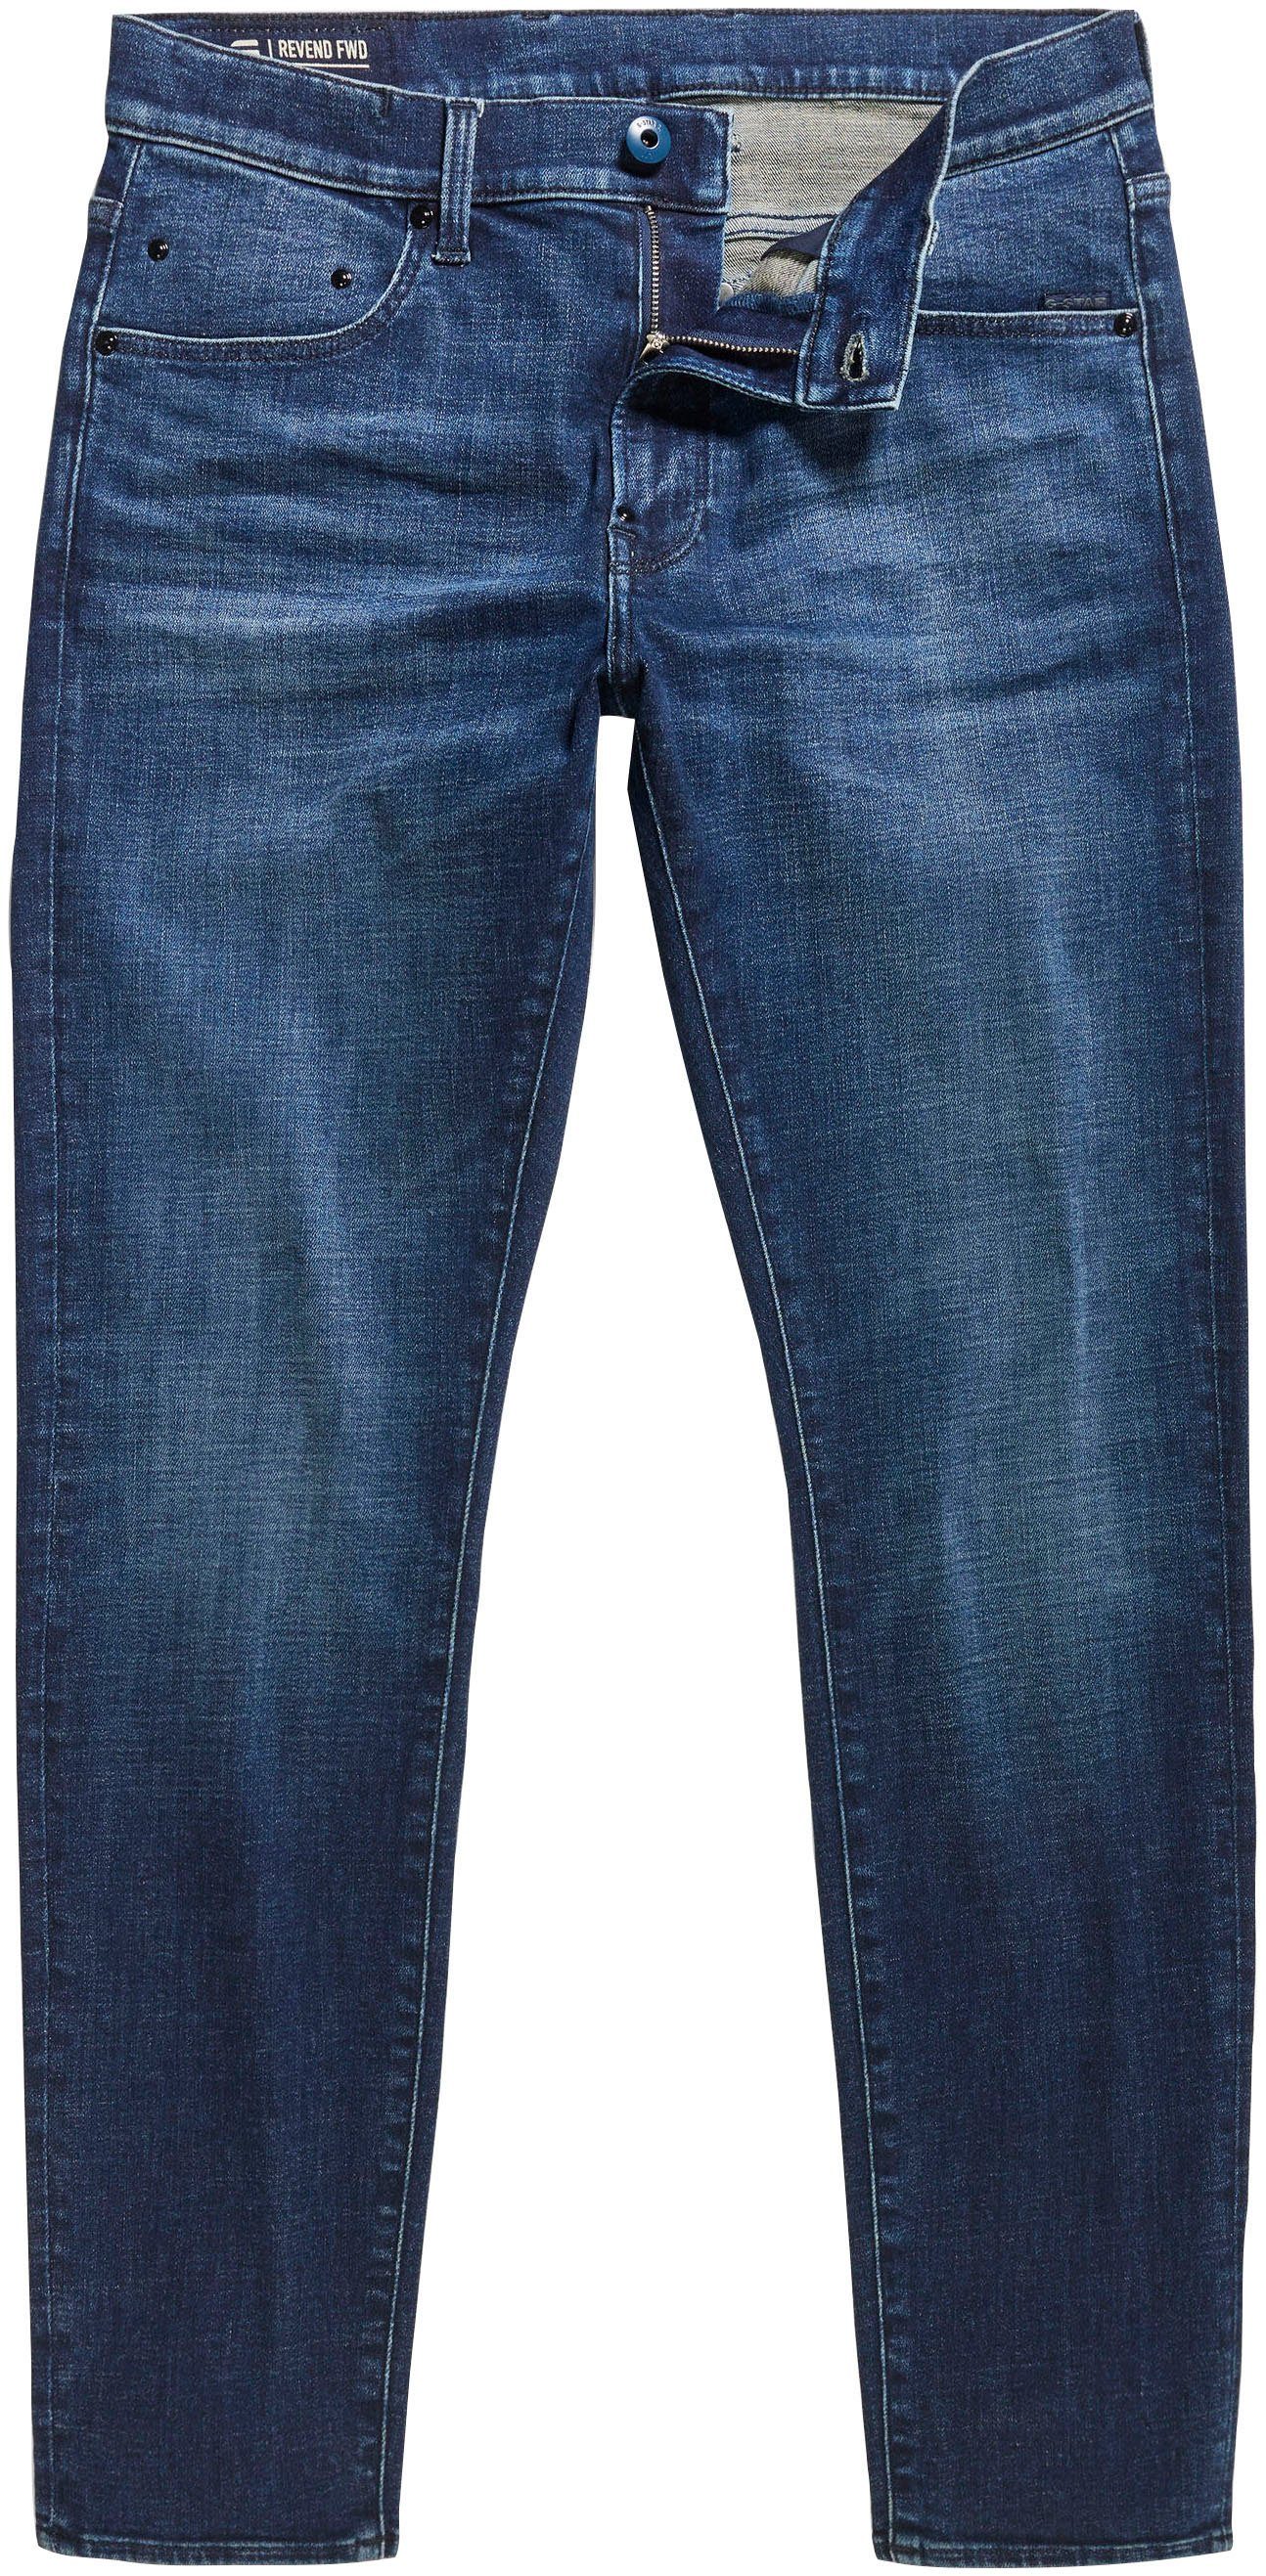 himalayan worn RAW in blue G-Star Skinny-fit-Jeans